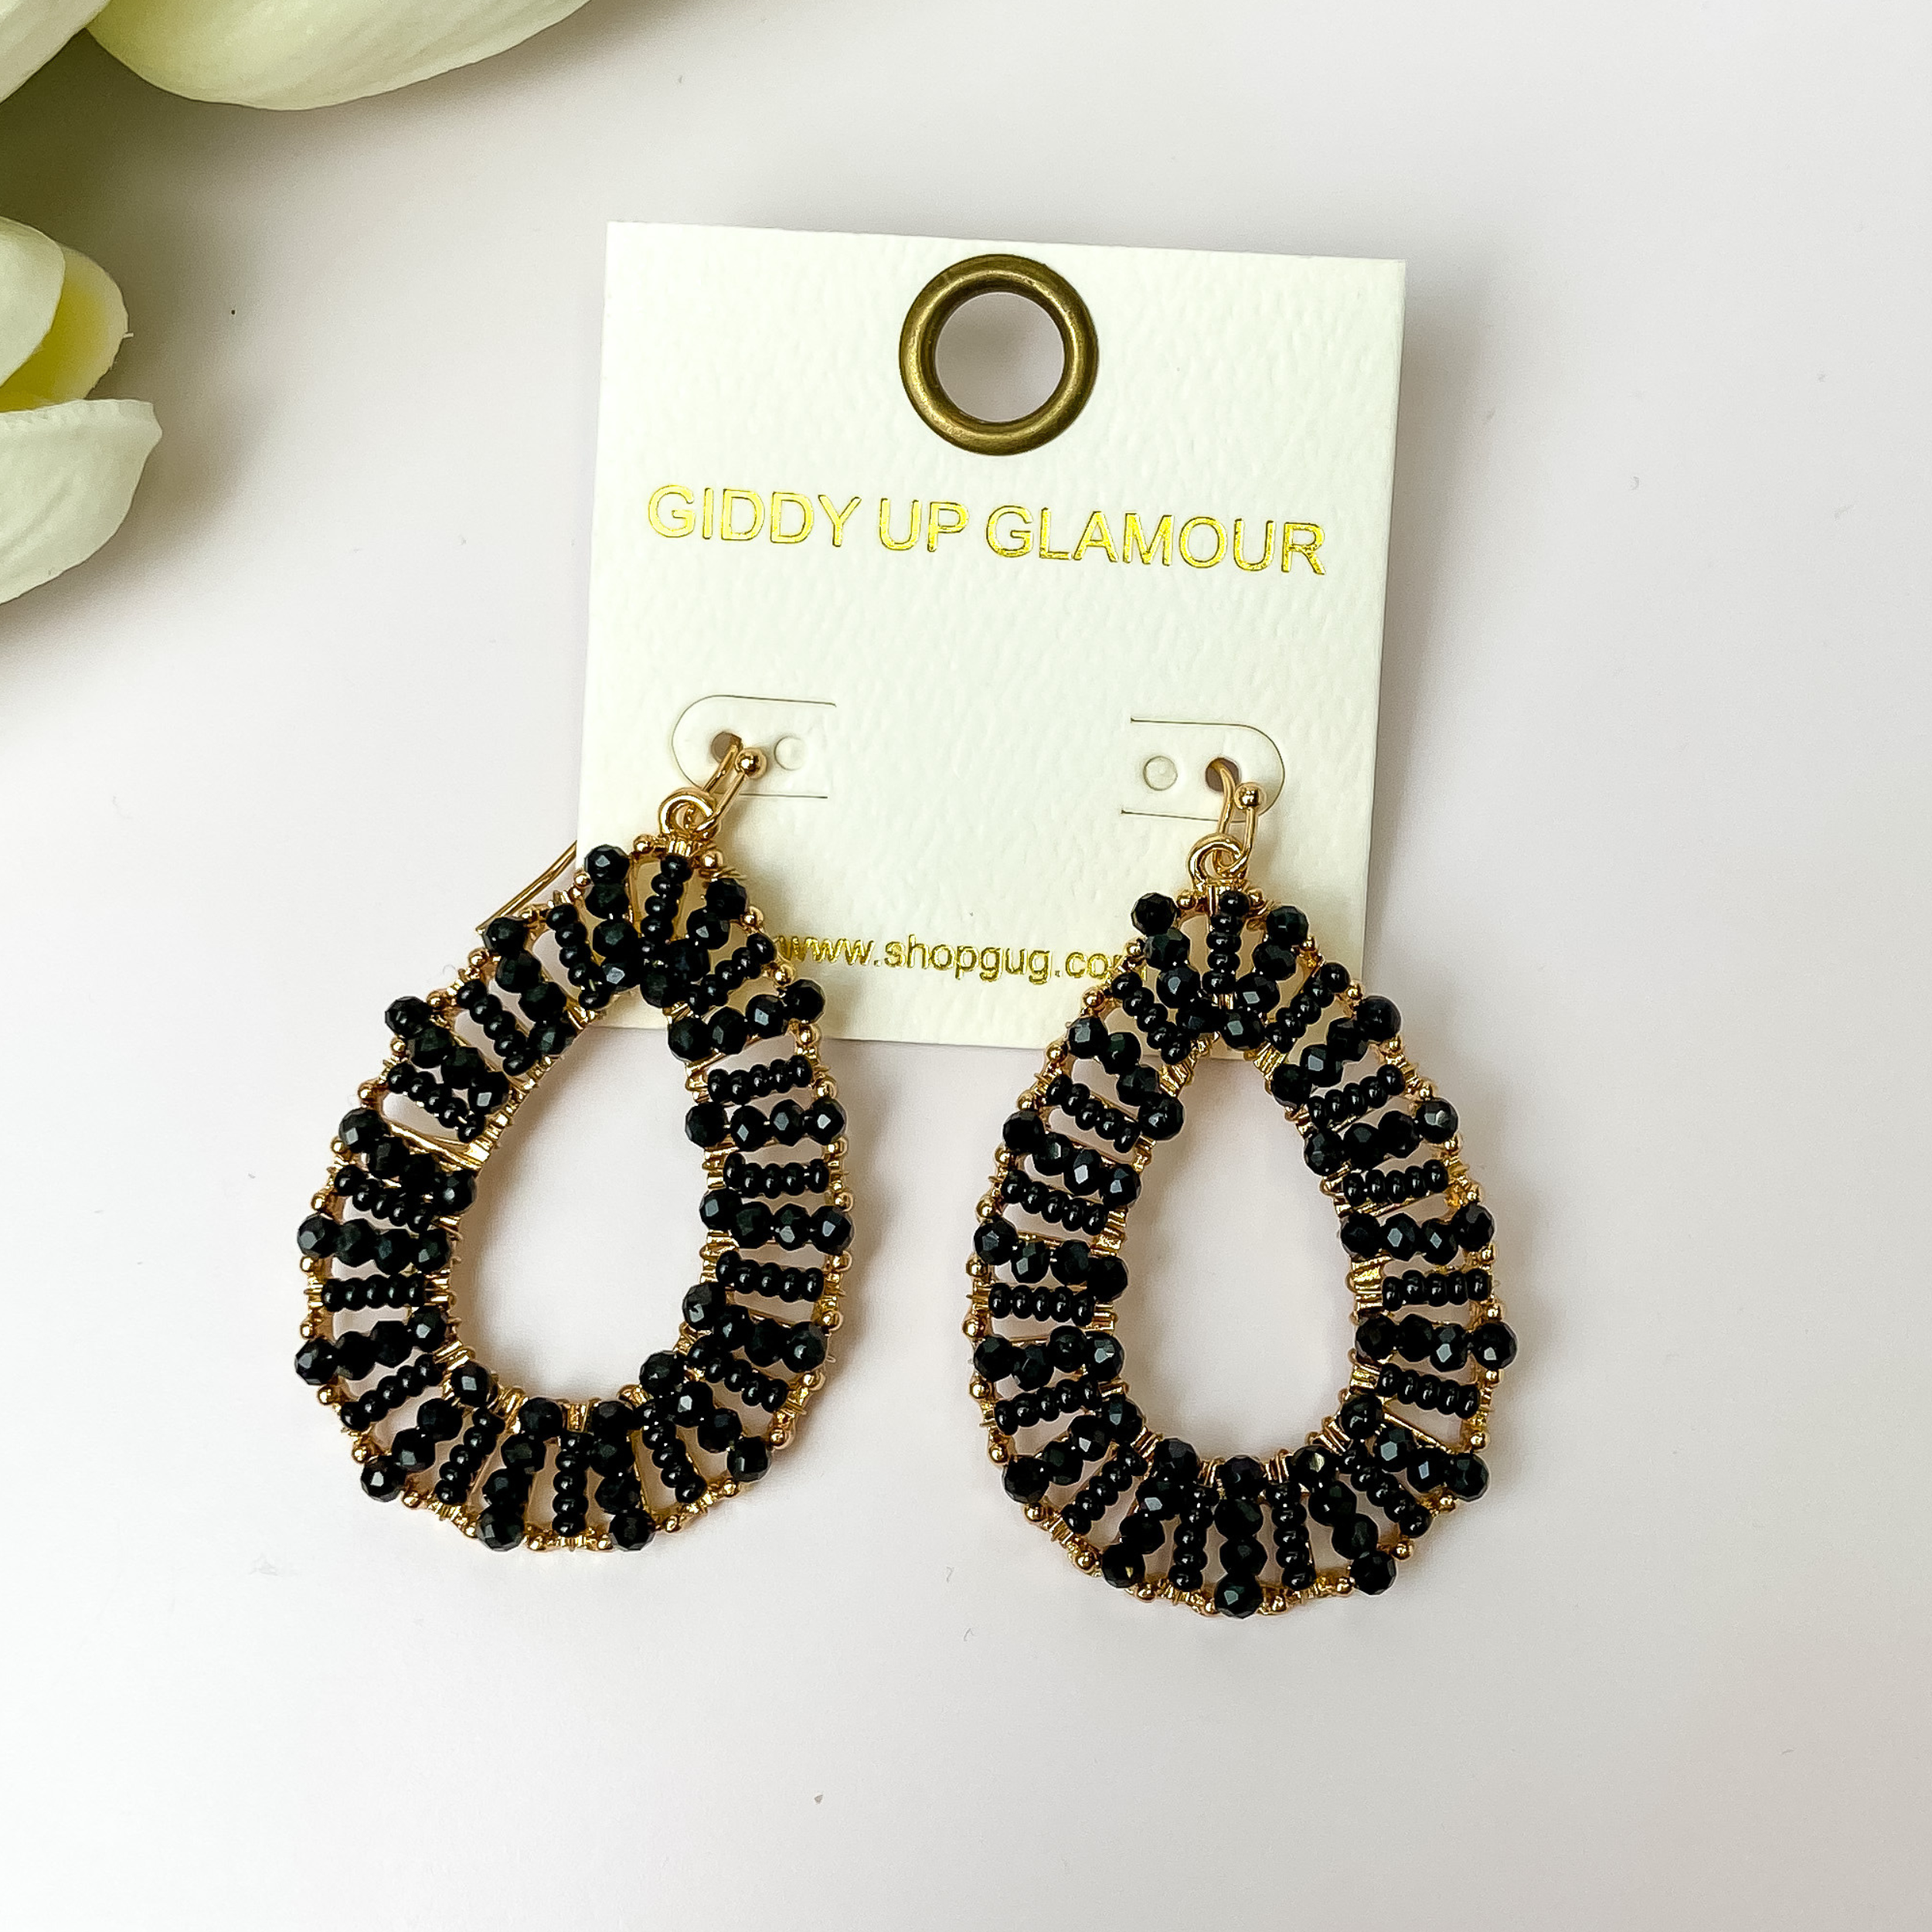 Gold undertone teardrop earrings with black beads pictured on a white background with white flowers.